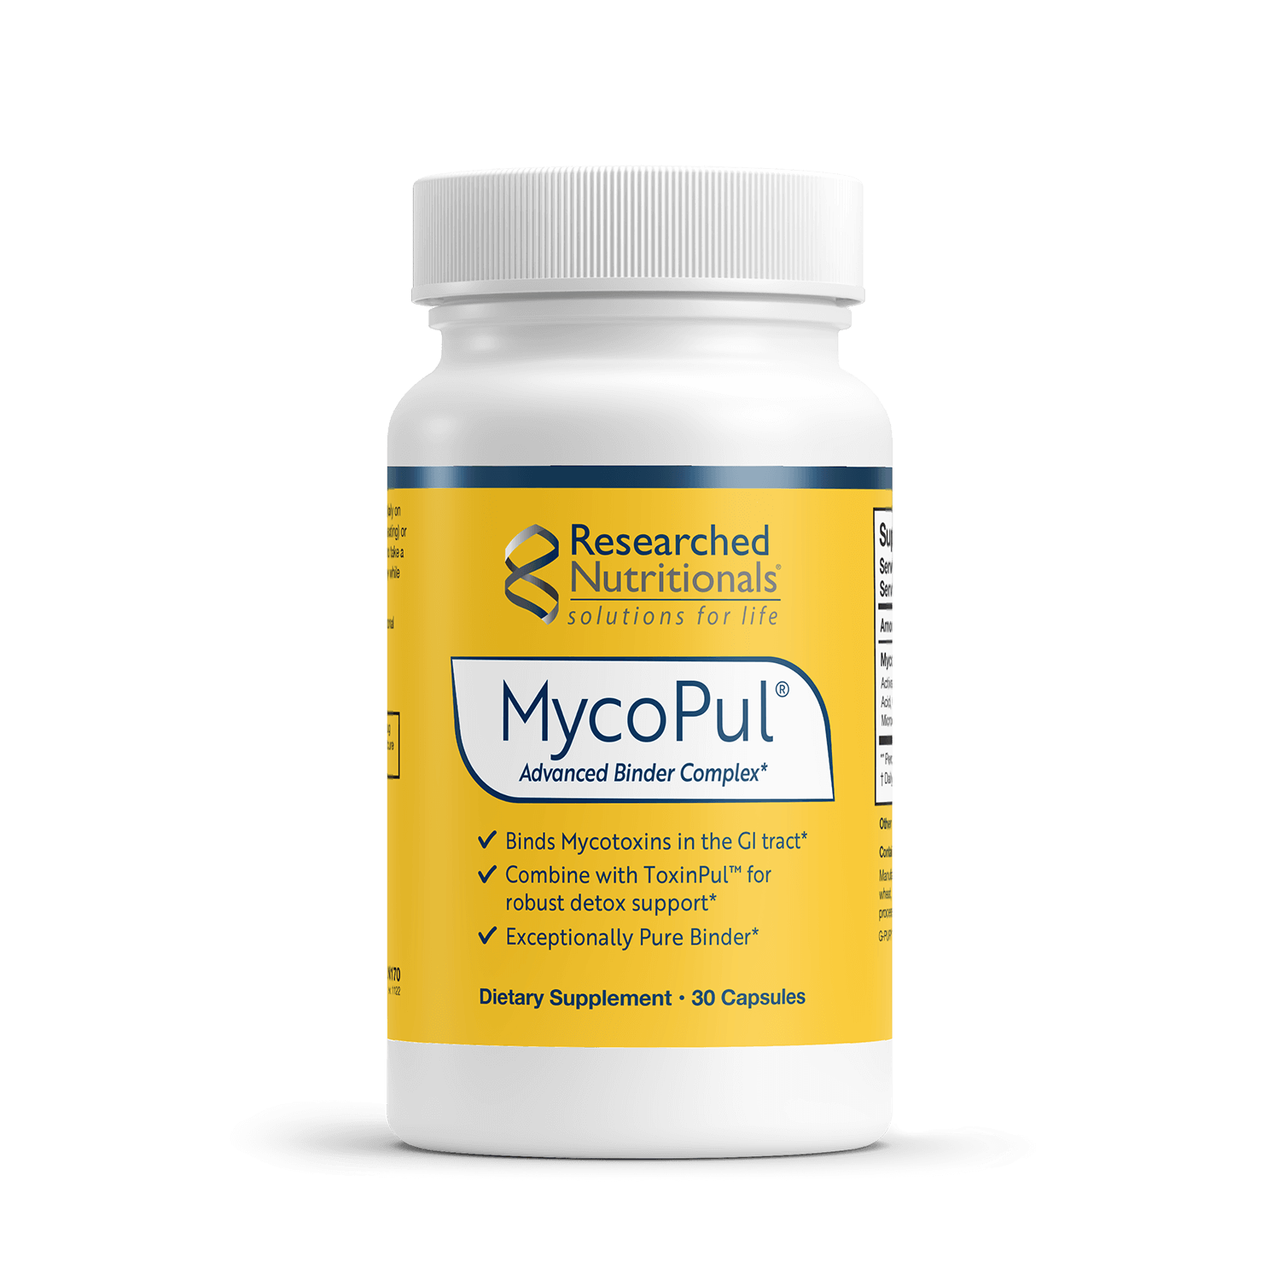 MycoPul -  Researched Nutrition